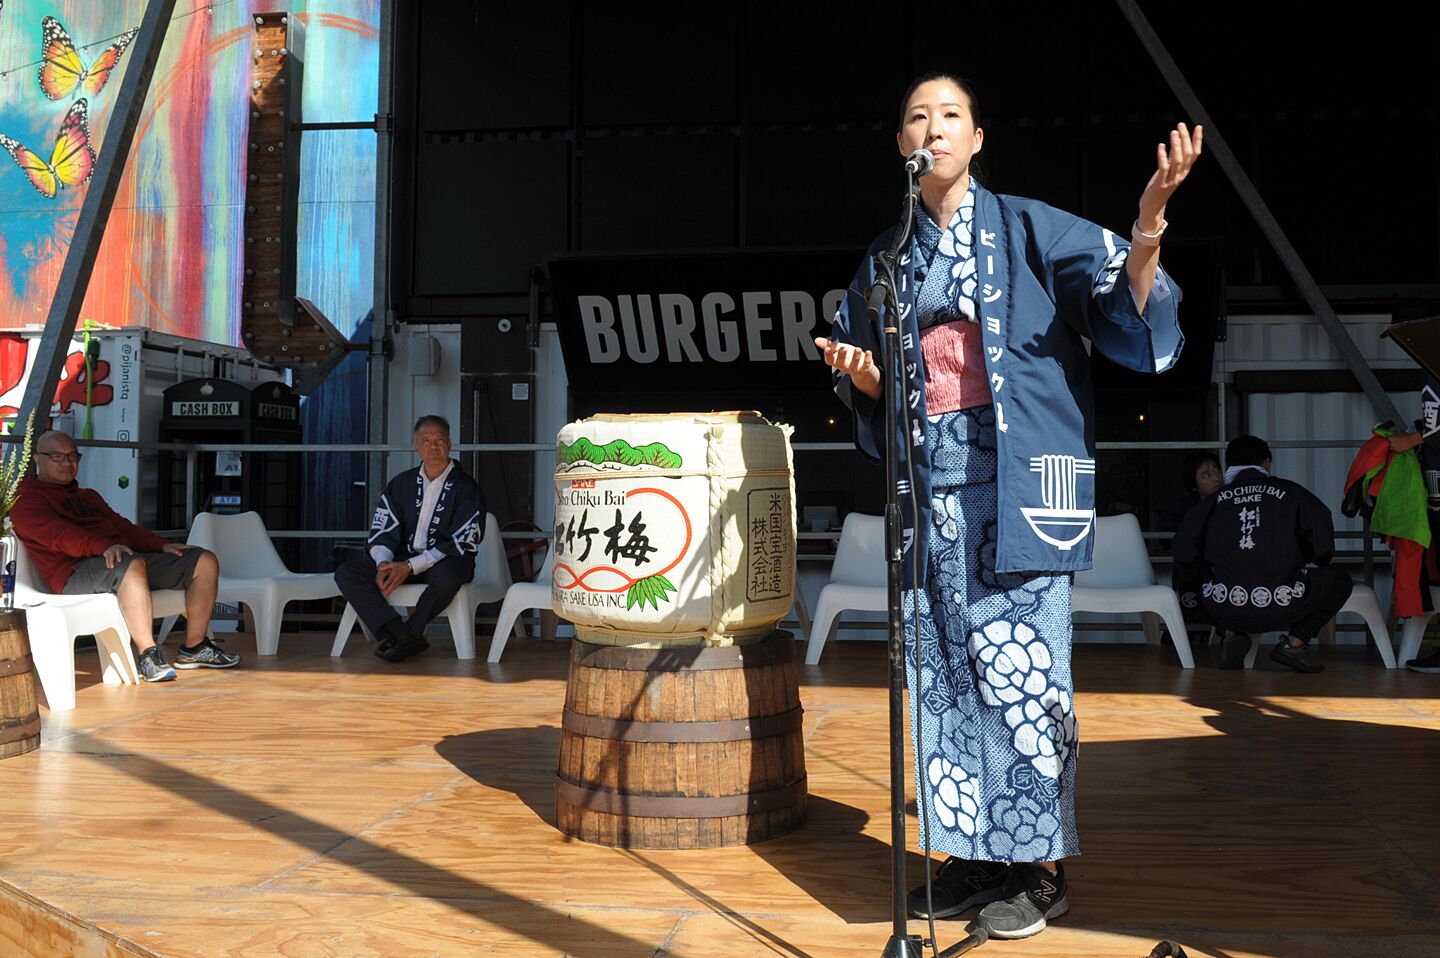 Sake-lovers toasted their good fortune at the San Diego Sake Festival at Quaryard in East Village on Sunday, Sept. 29, 2019.